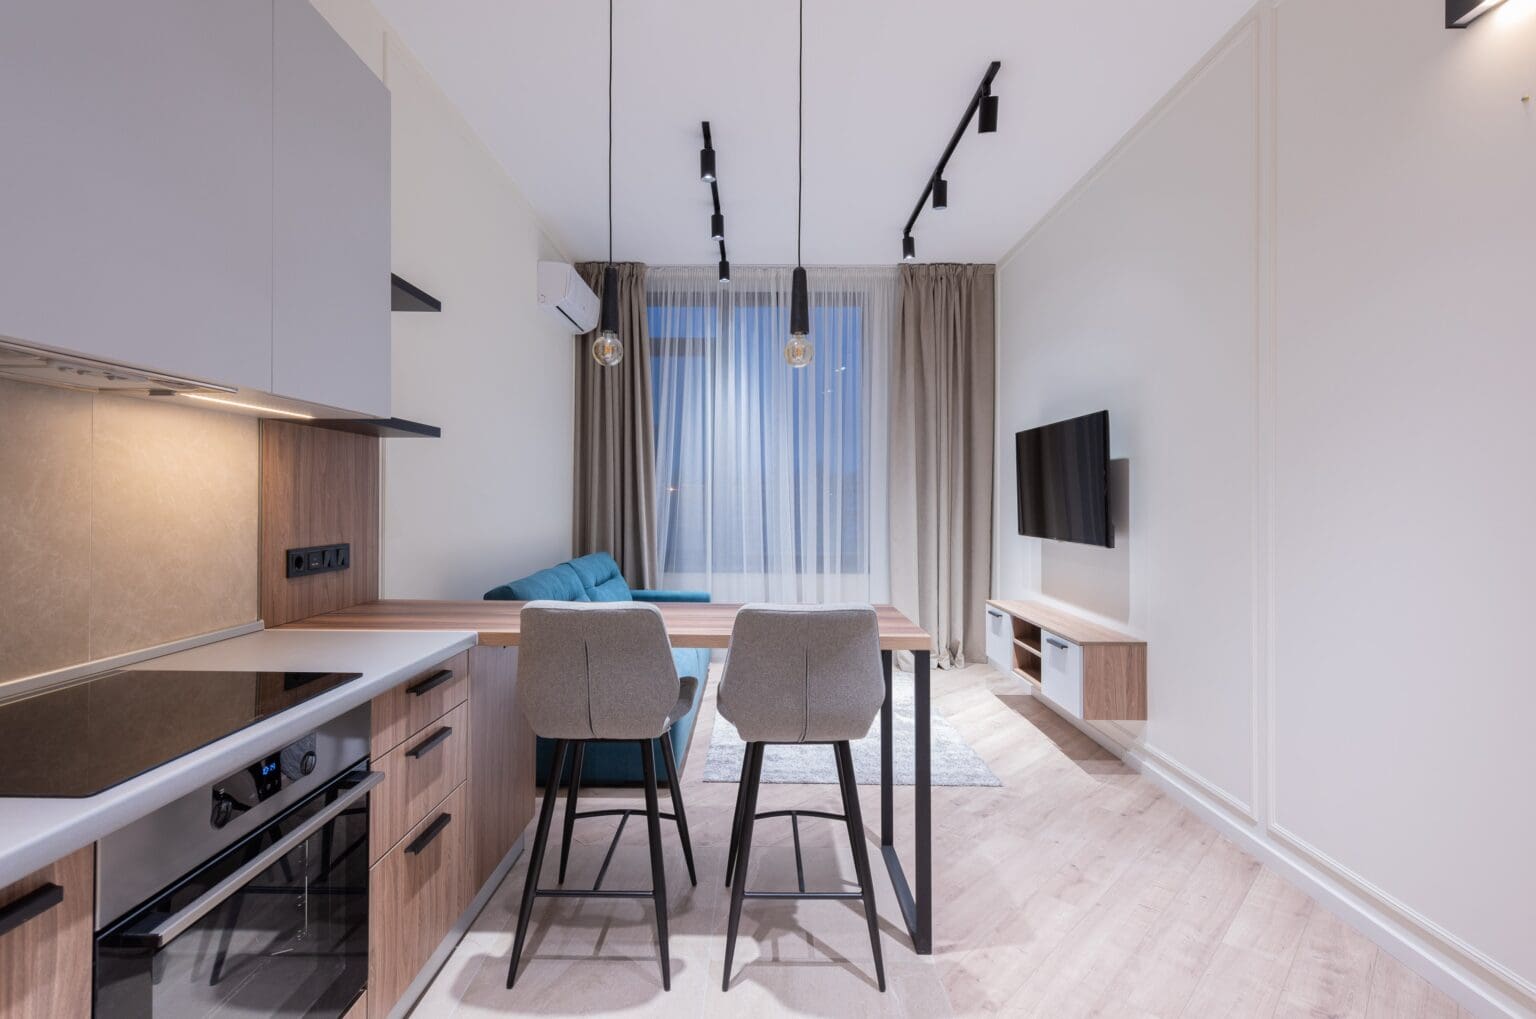 Modern kitchen with a dining area featuring a wooden table, two grey chairs, pendant lights, and integrated appliances, leading to a cozy living space with a tv.